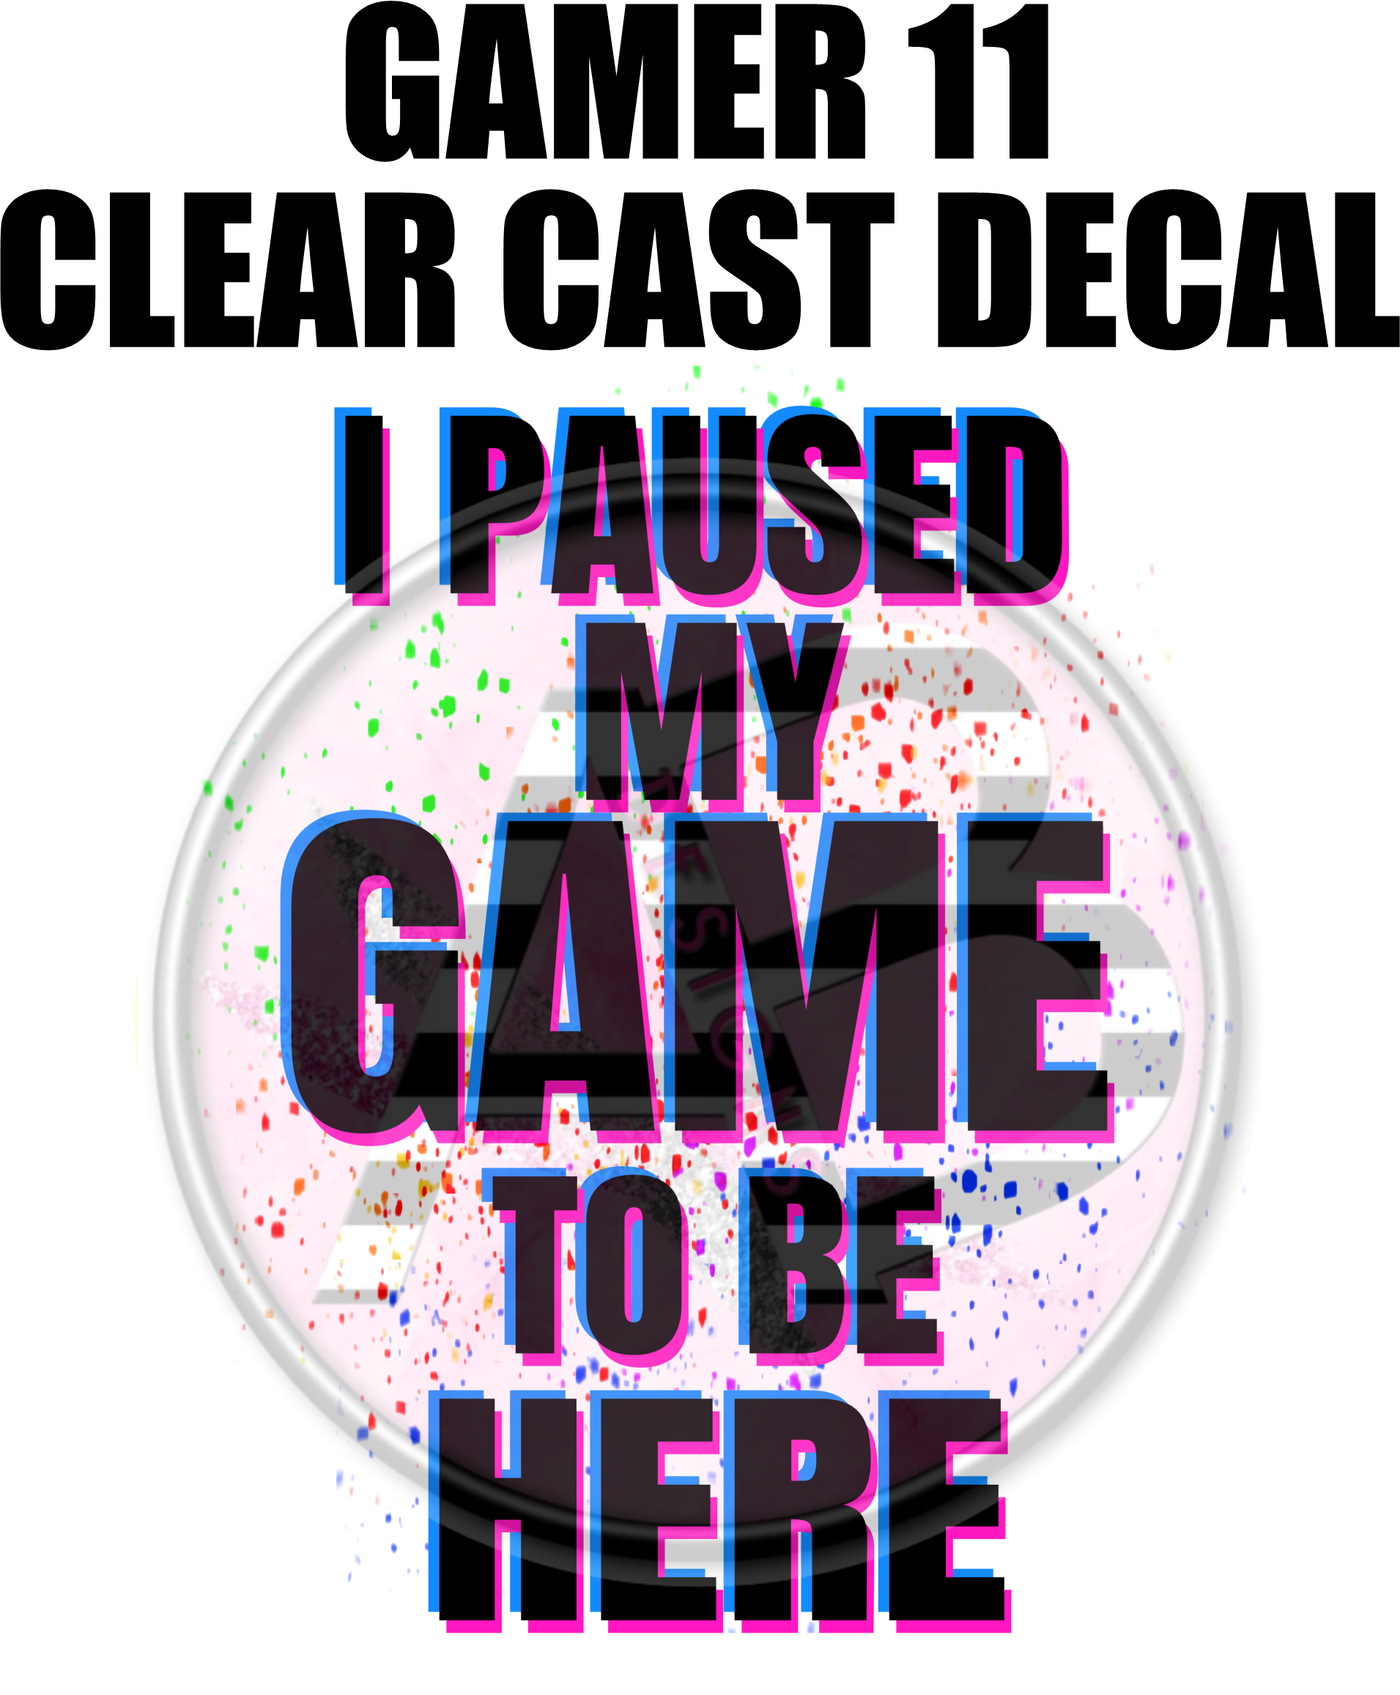 Gamer 11 - Clear Cast Decal